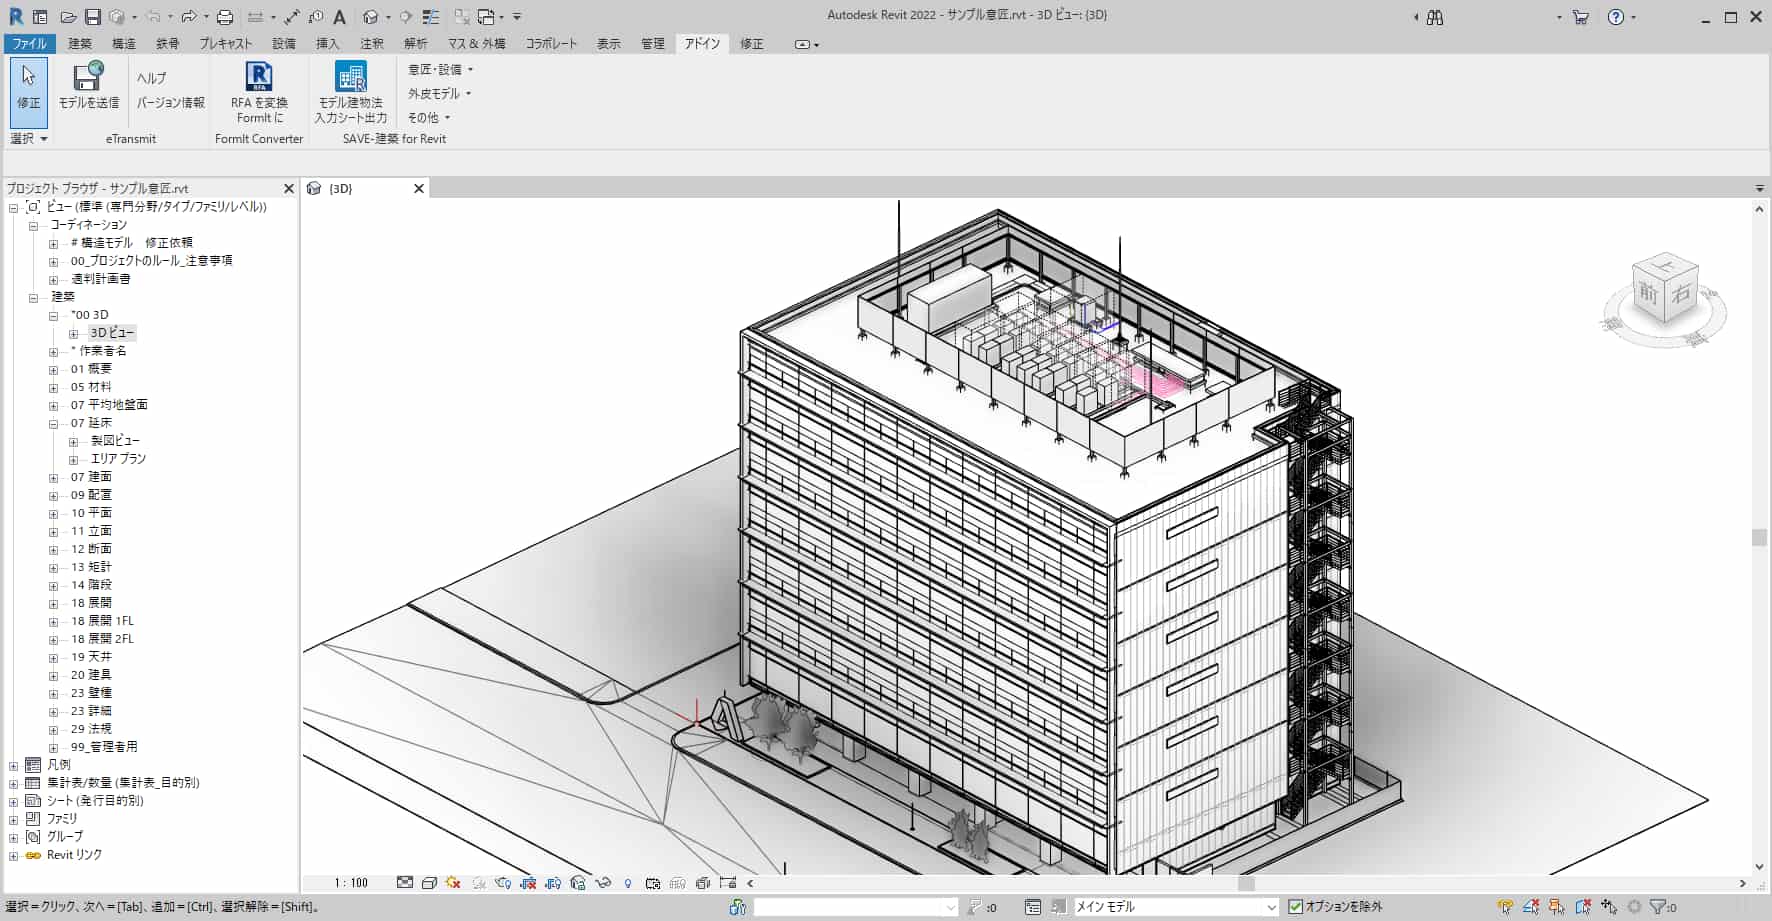 SAVE-建築 for Revit